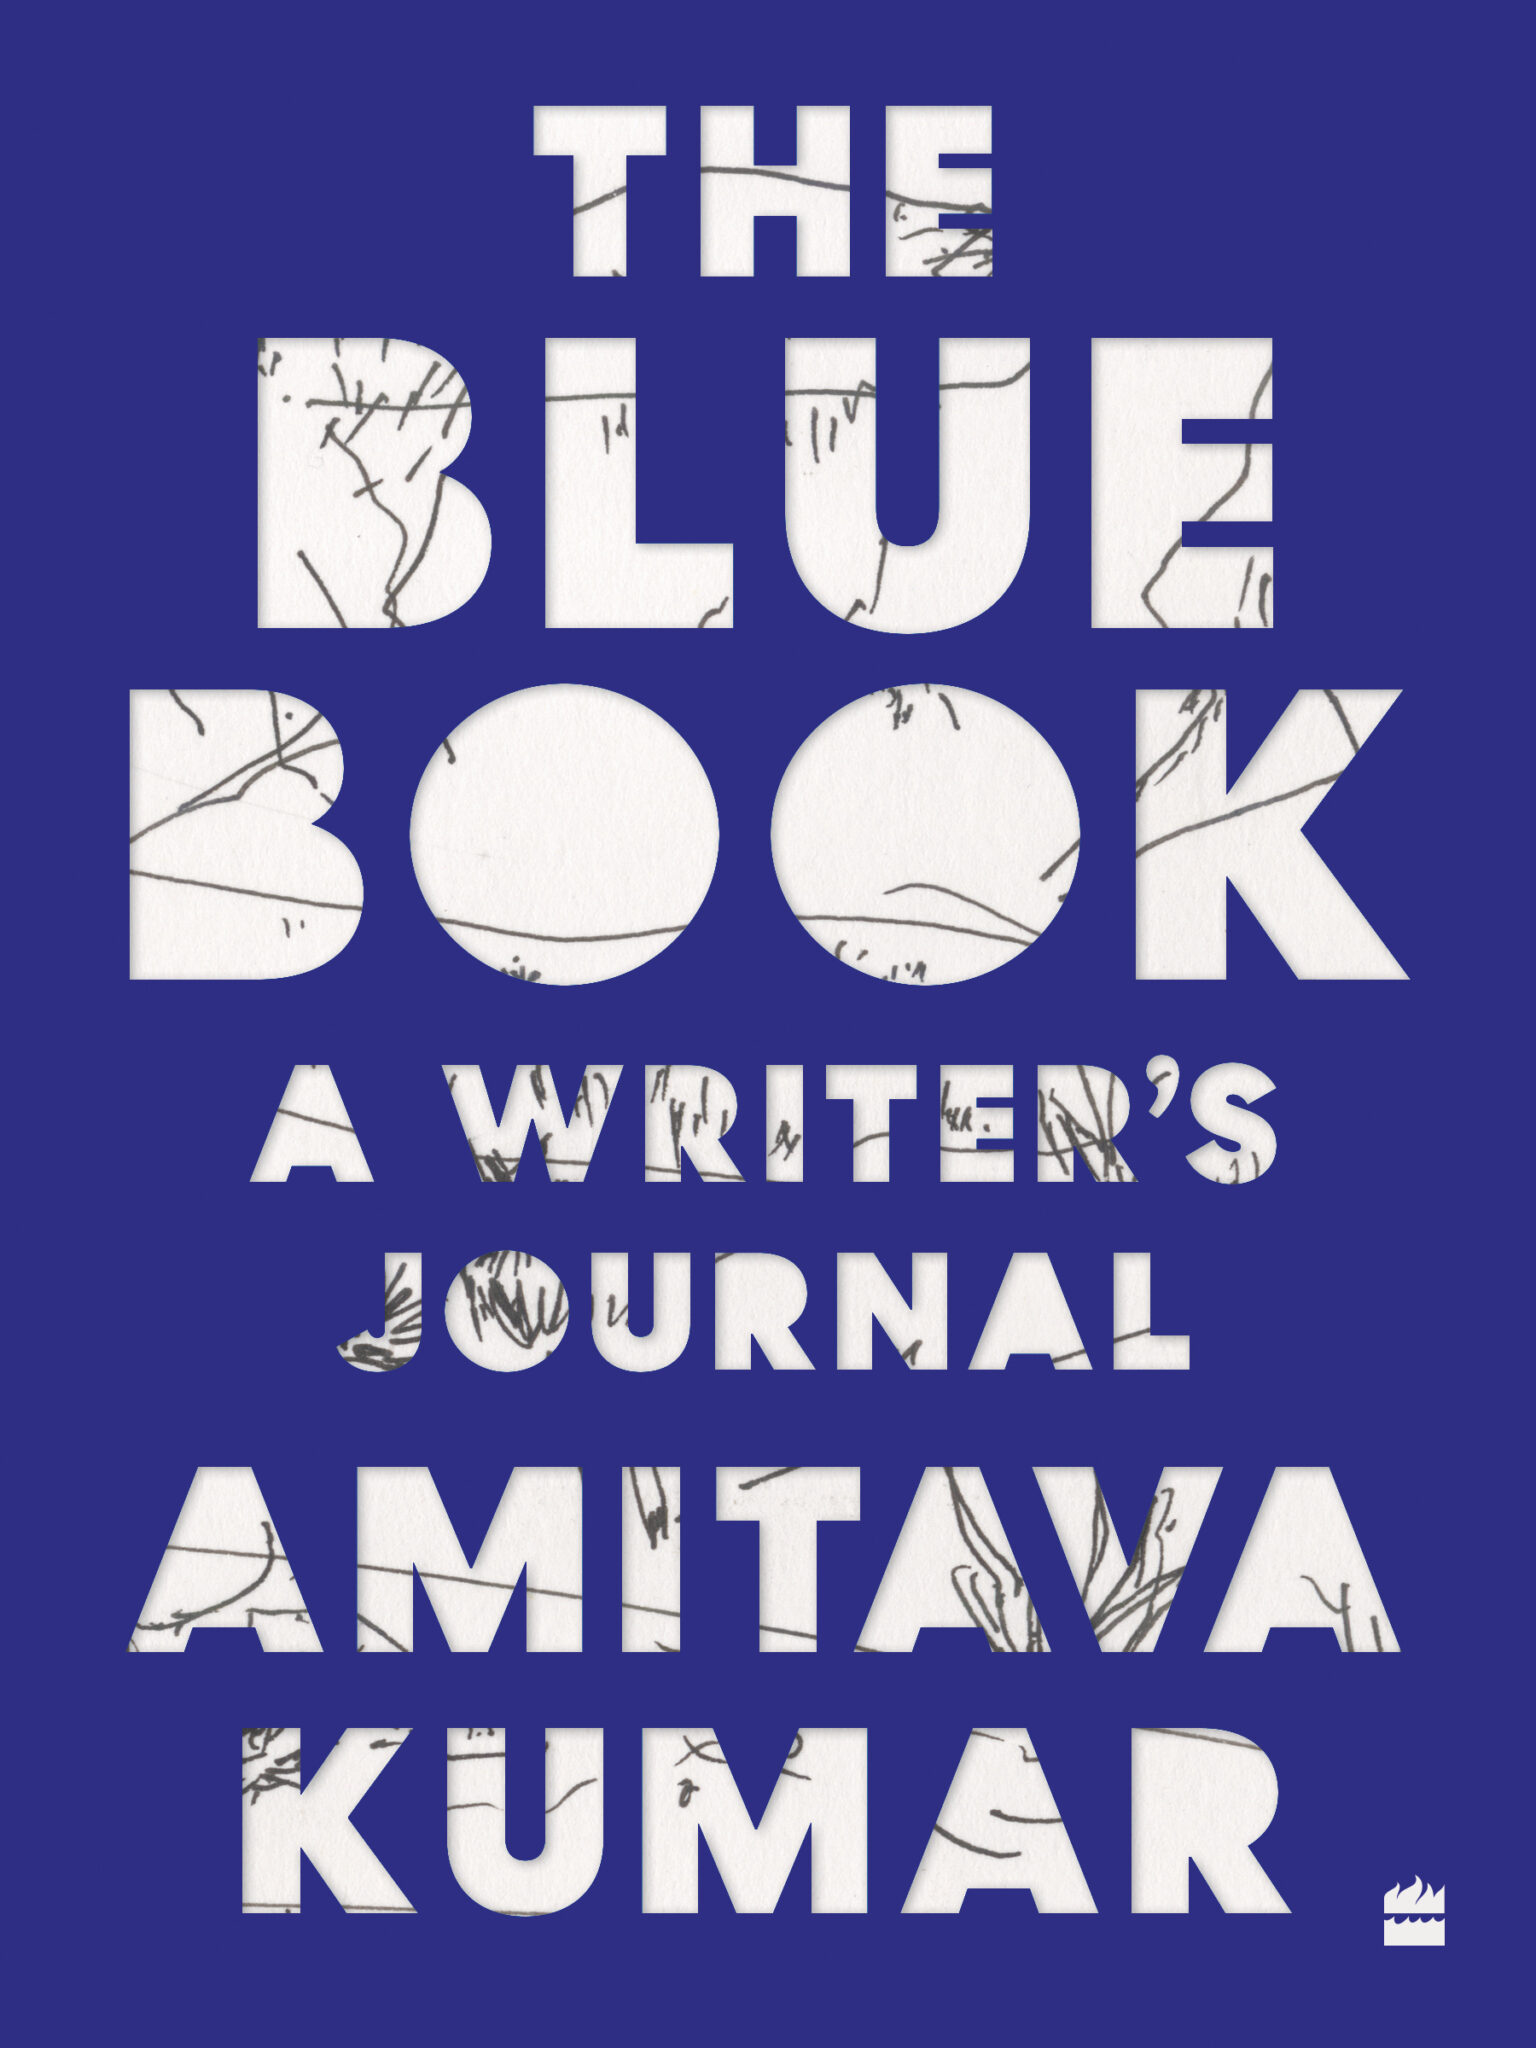 The_Blue_Book